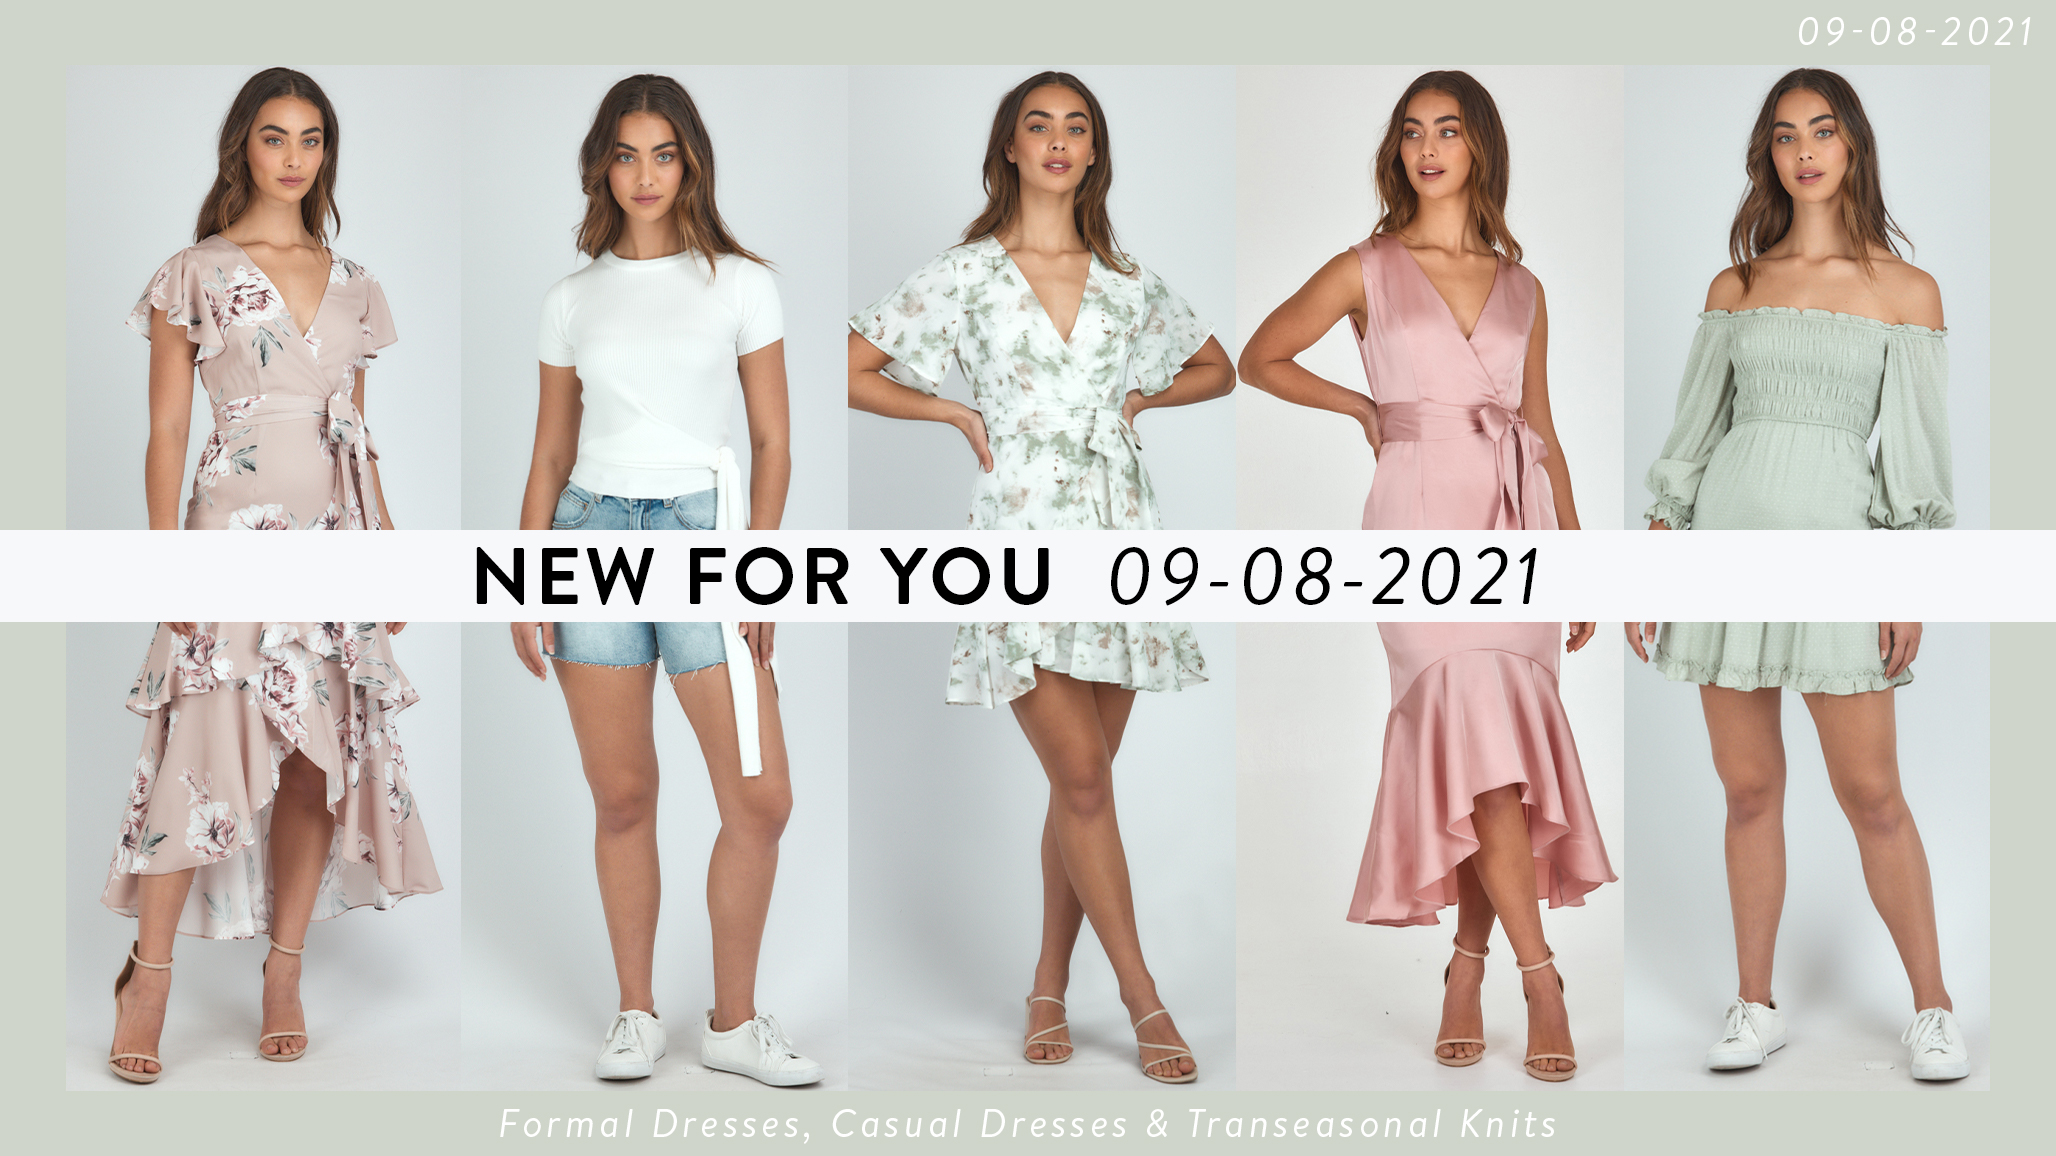 NEW FOR YOU 09.08.2021